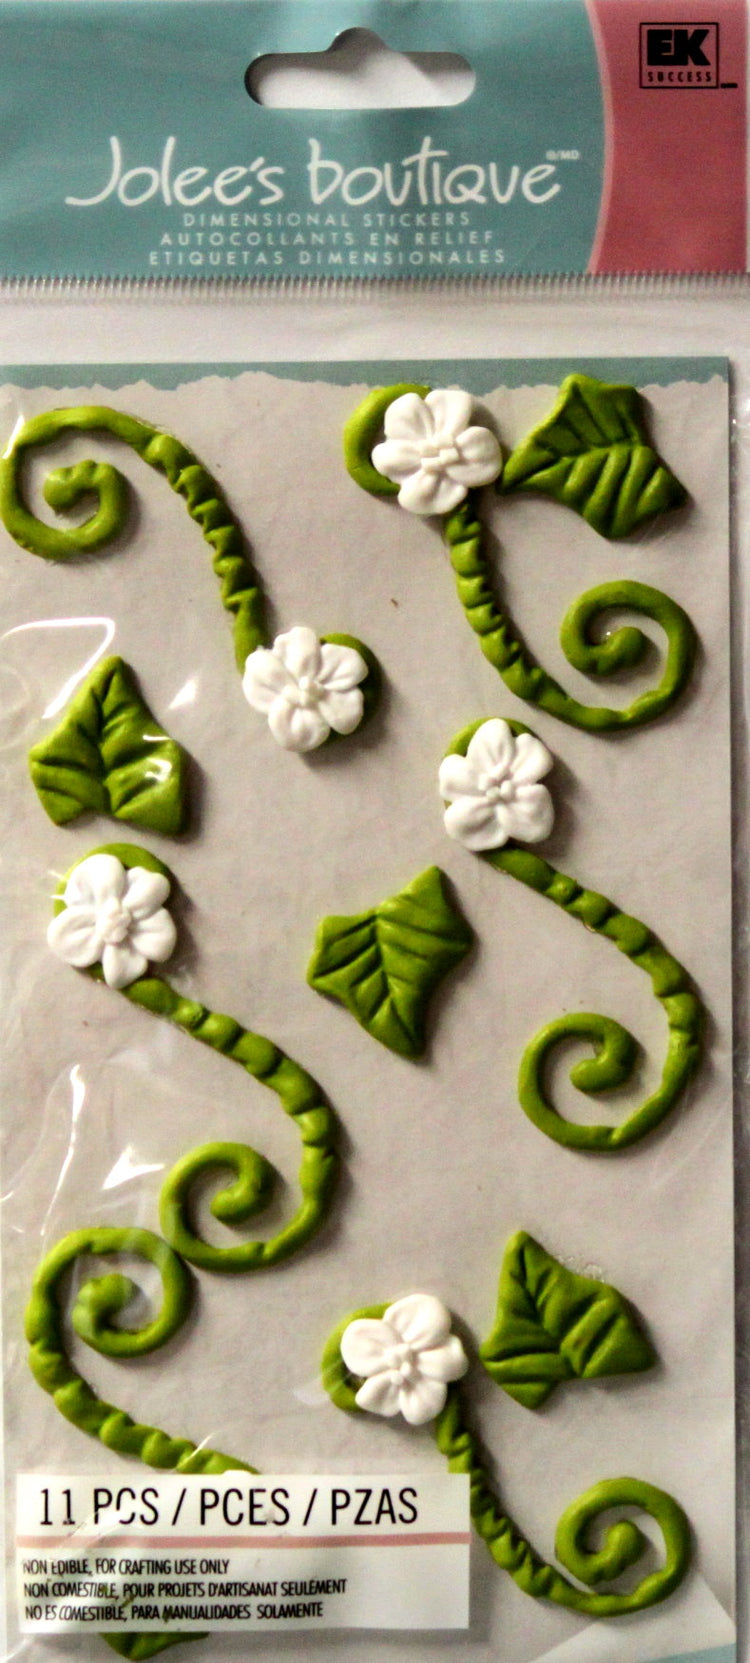 EK Success Jolee's Boutique Green Icing Flouishes With White Flowers Dimensional Stickers